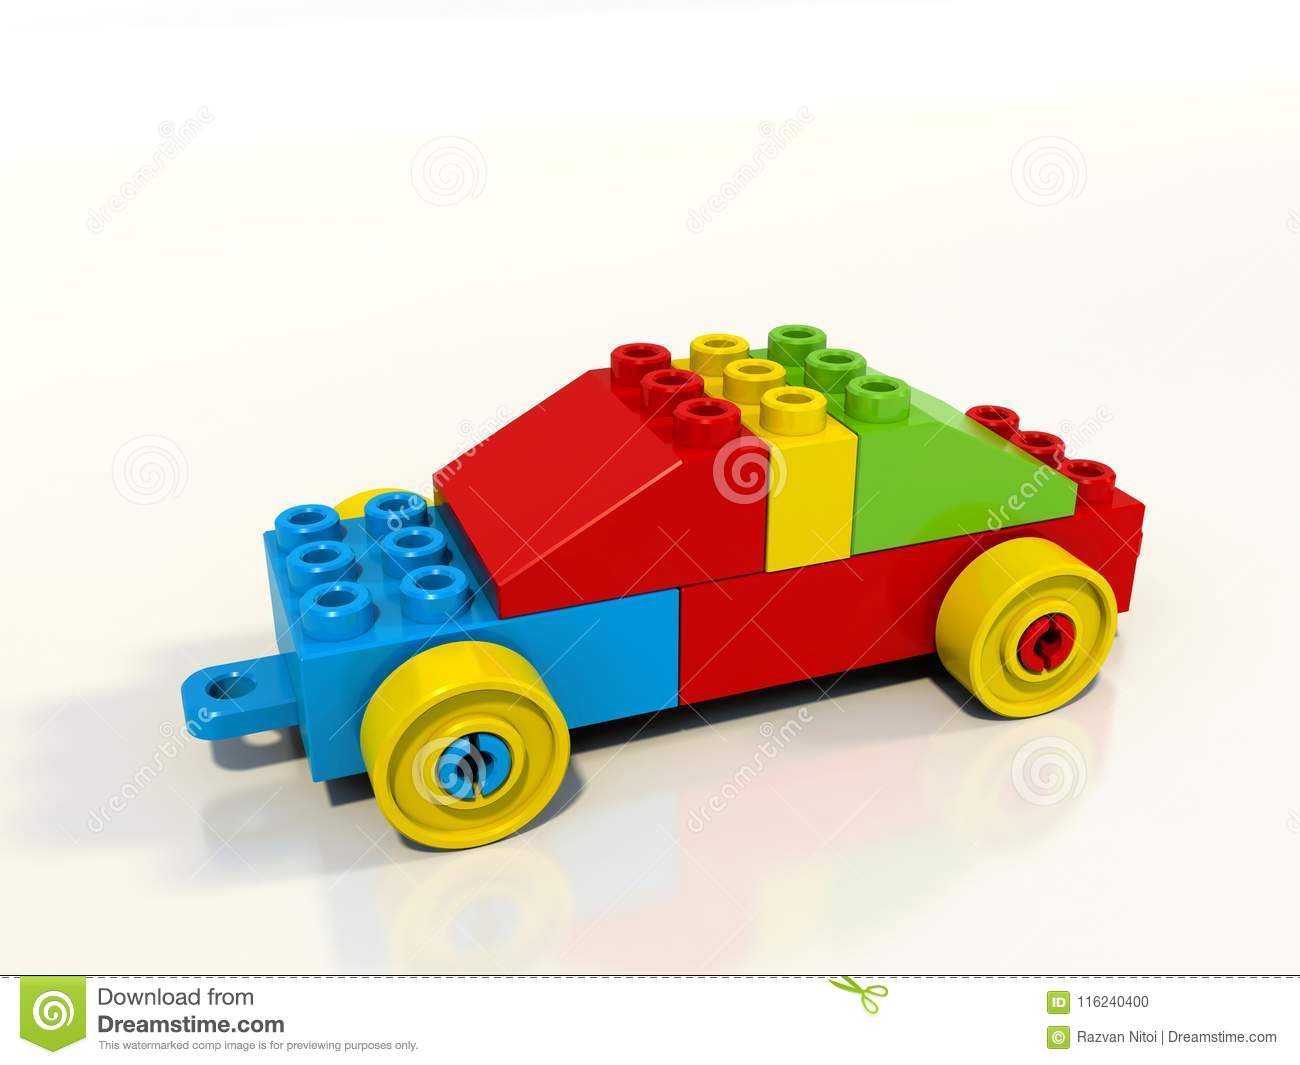 toy-car-built-colorful-blocks-lego-style-single-object-toy-car-built-lego-style-colorful-blocks-shiny-plastic-material-116240400.jpg